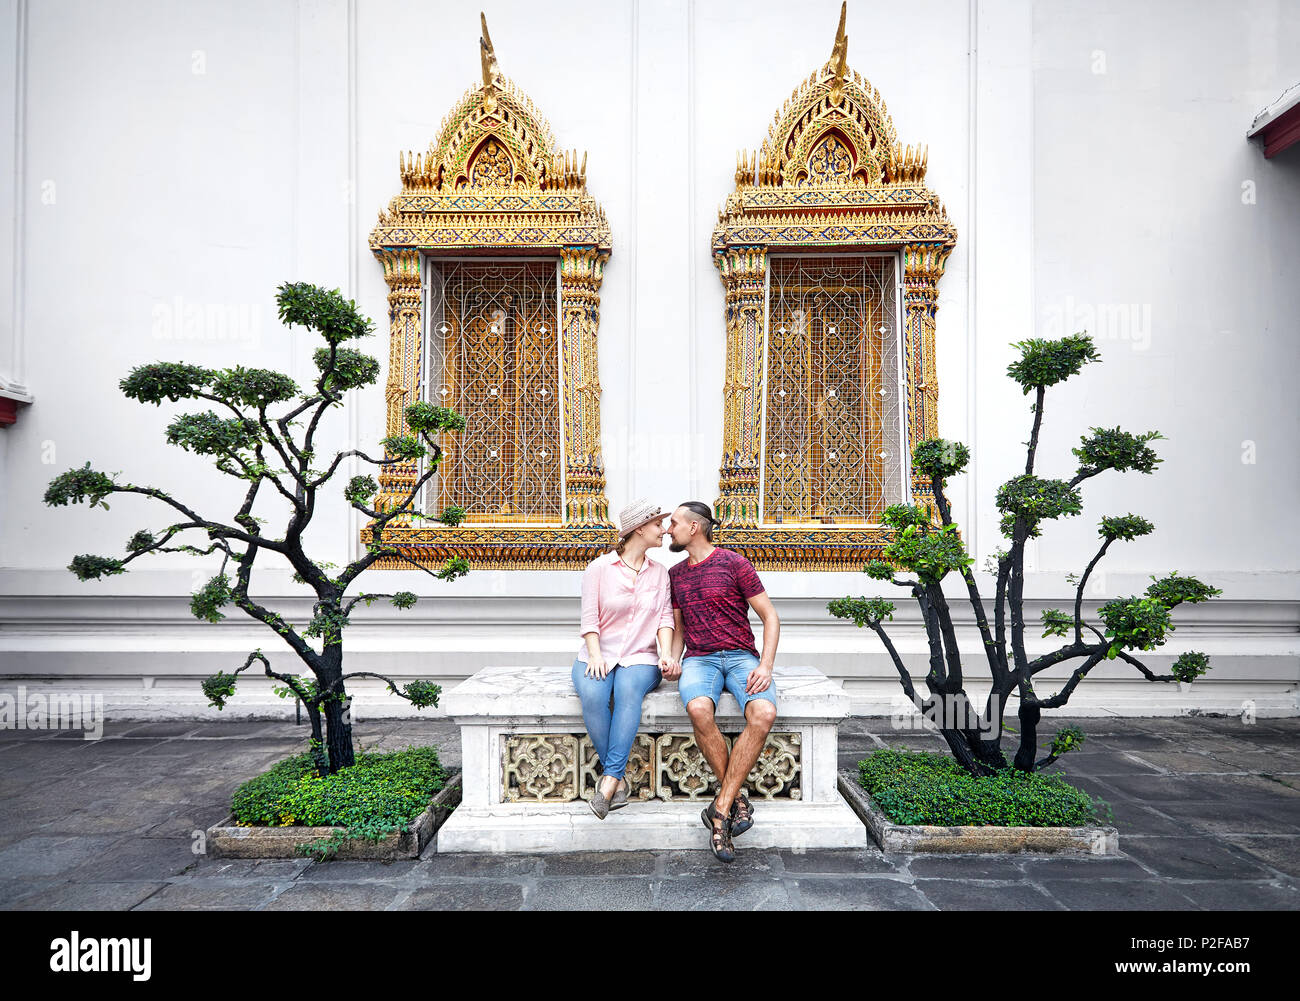 Young Couple in red clothes sitting on the bench near decorative trees and golden windows of Wat Pho in Bangkok, Thailand Stock Photo